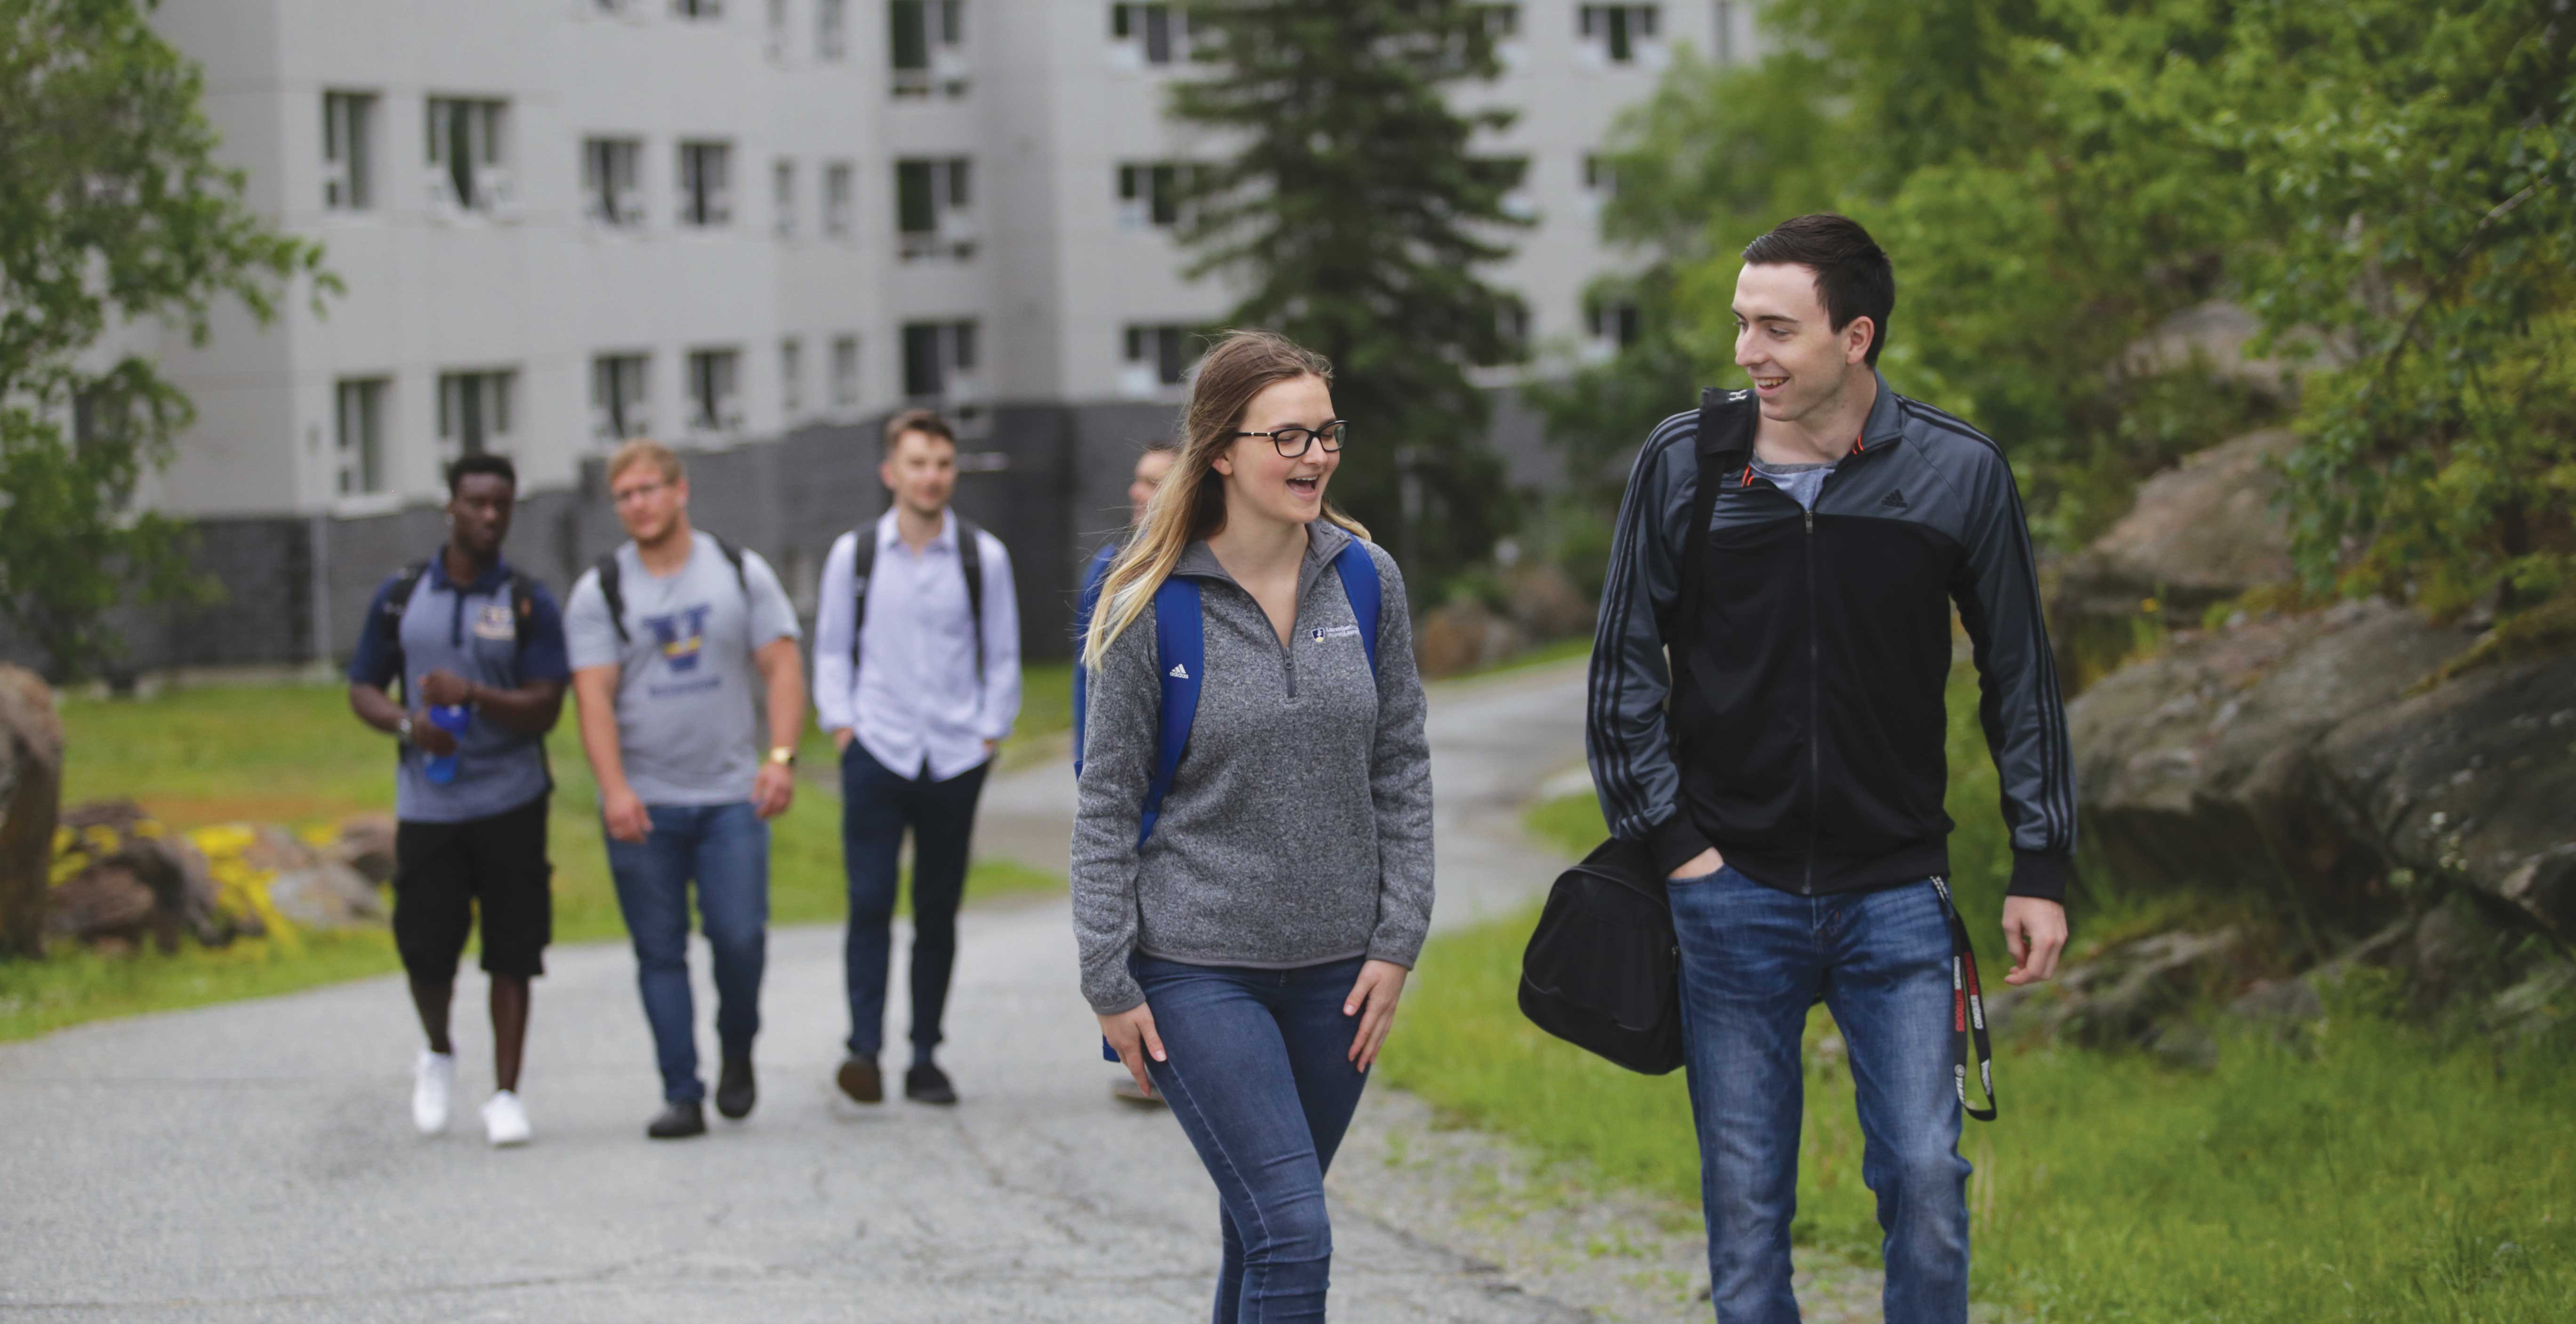 Students walking by a residence